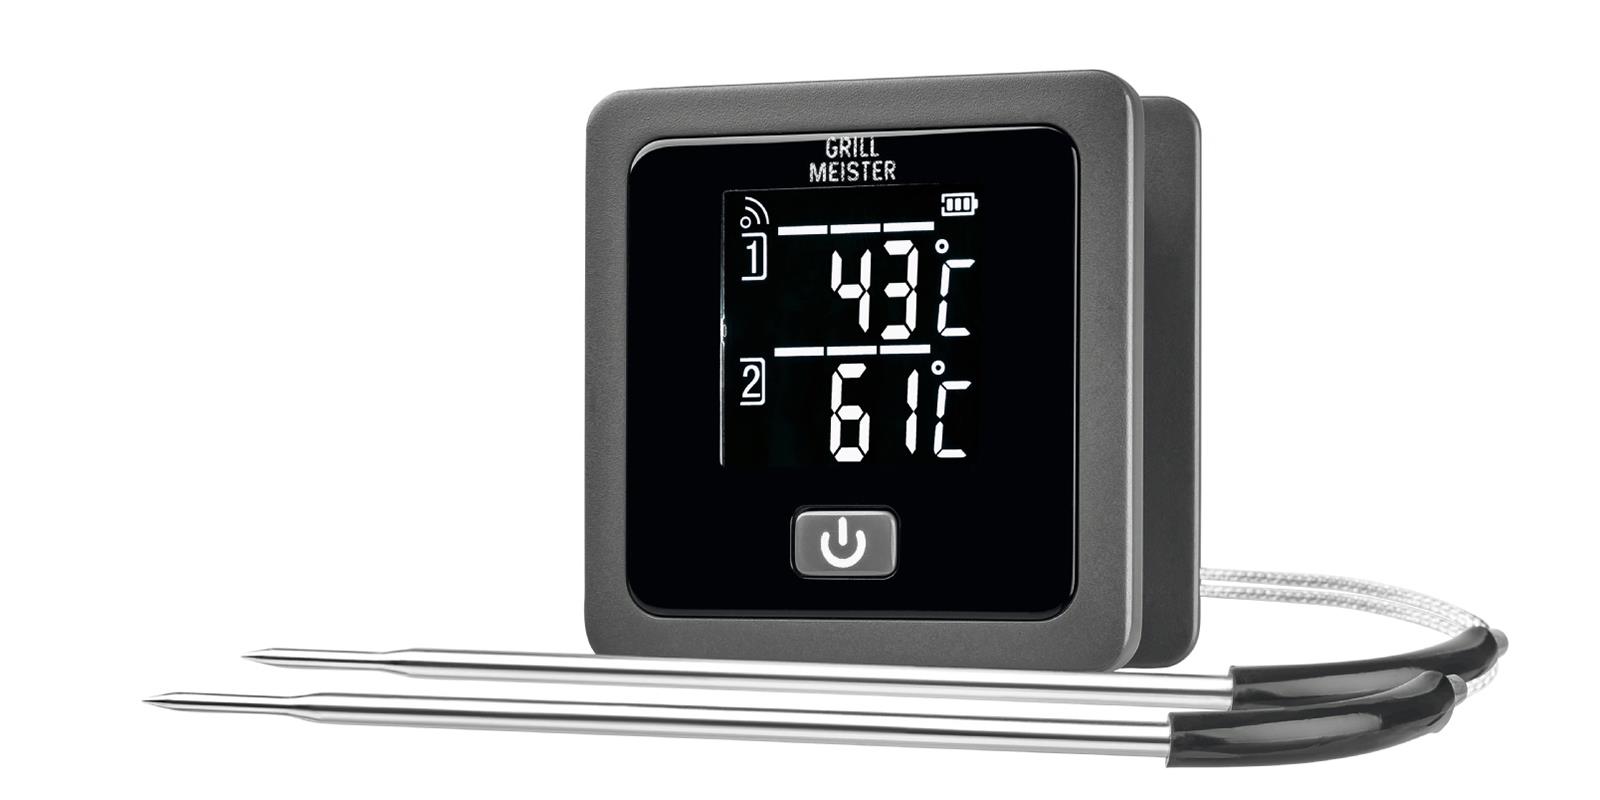 GRILLMEISTER funk-Grillthermometer GTGT 2.4